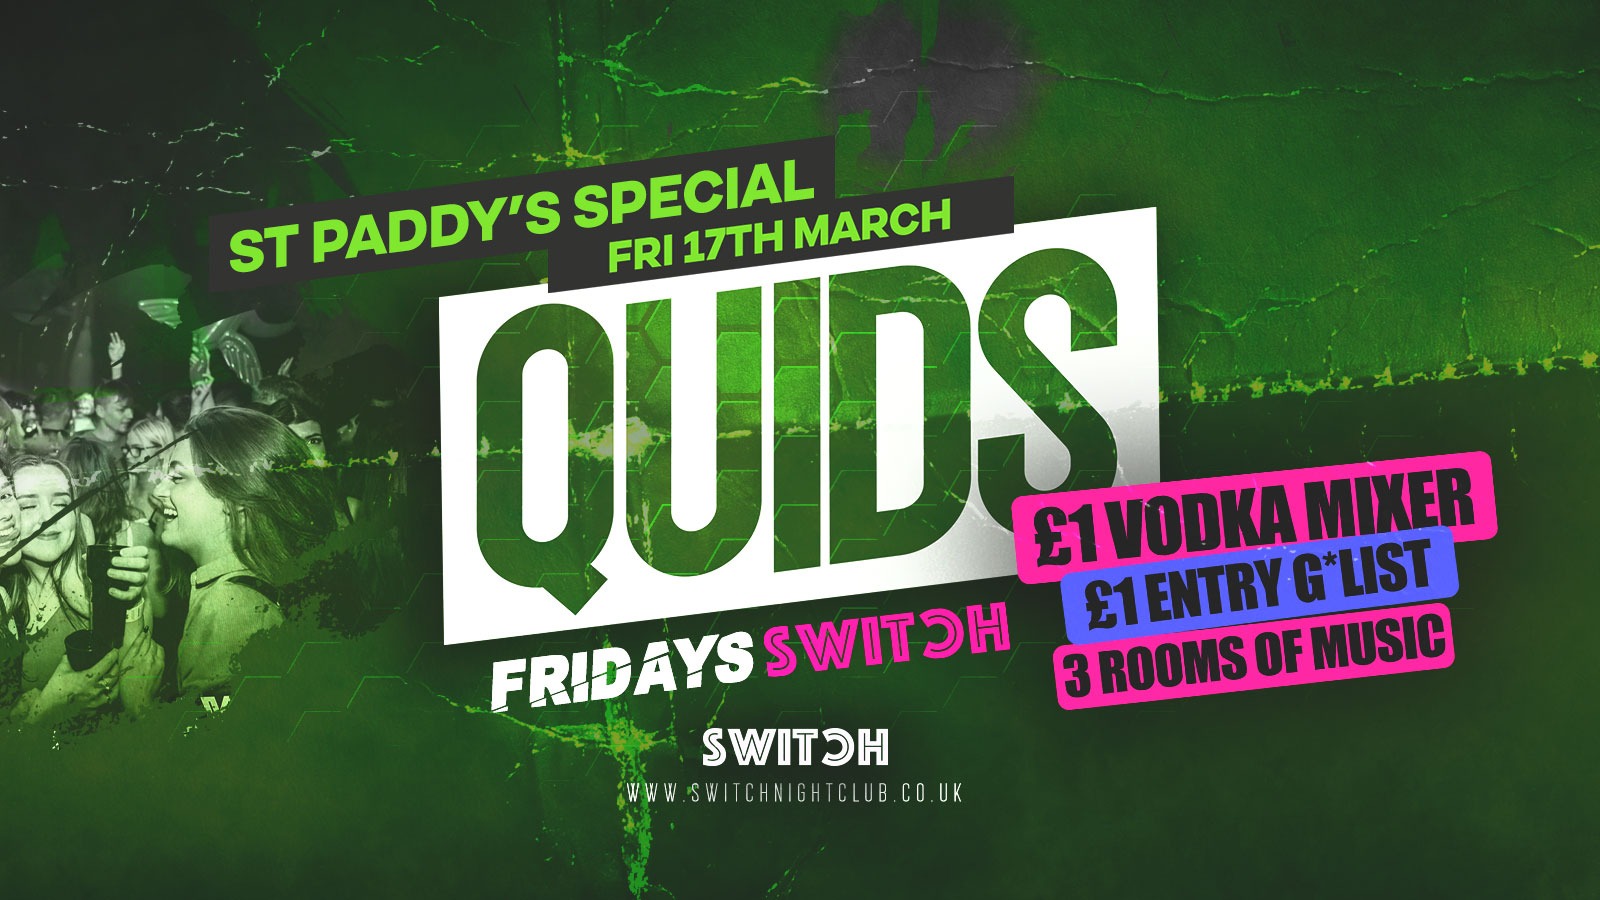 QUIDS FRIDAYS | £1 Drinks PADDYS DAY SPECIAL